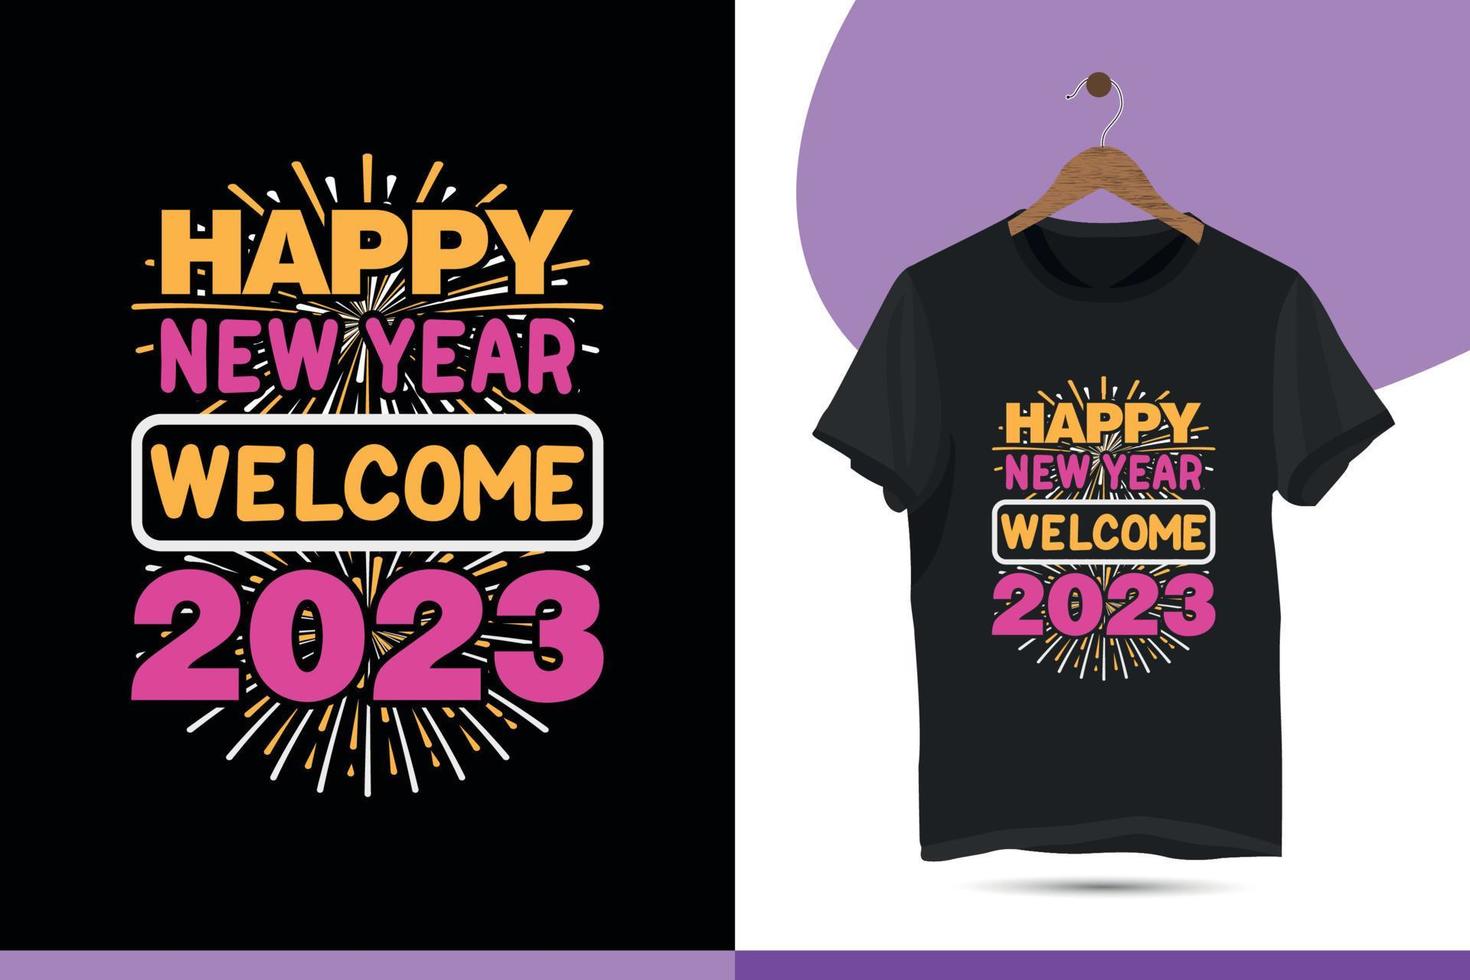 Happy new year welcome 2023 - Happy new year vector design template.